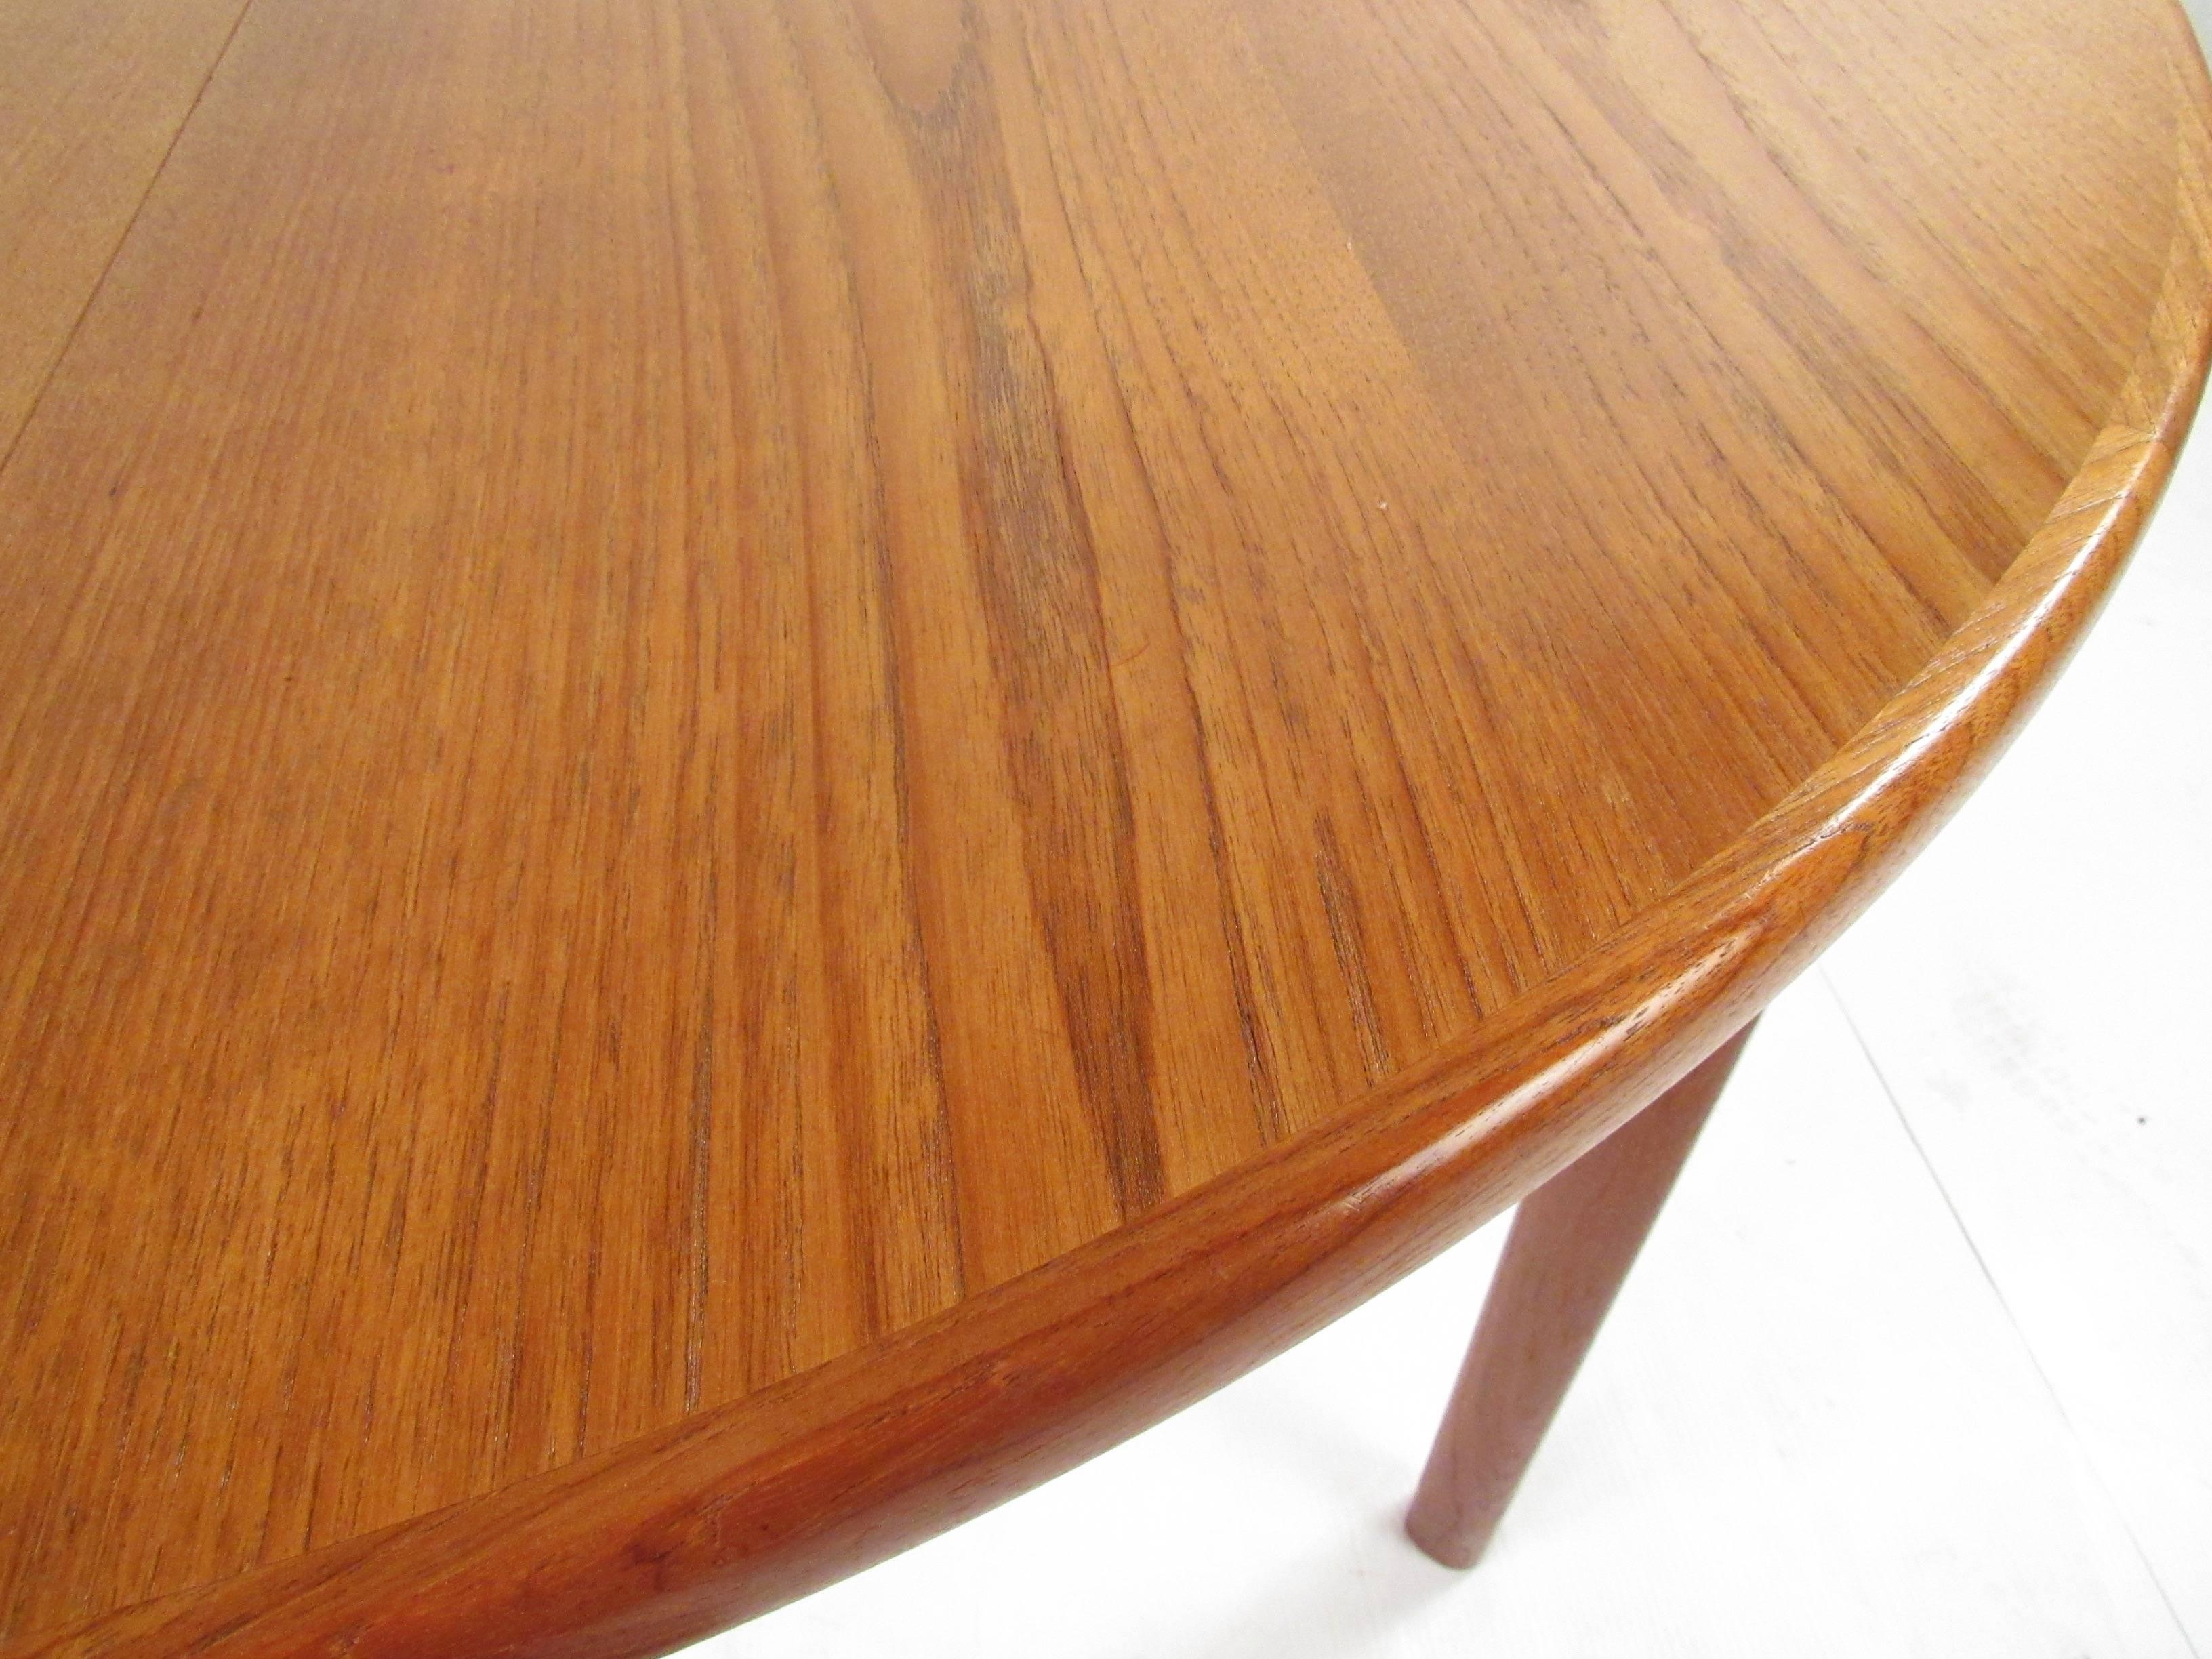 20th Century Scandinavian Modern Teak Dining Table with Two Leaves